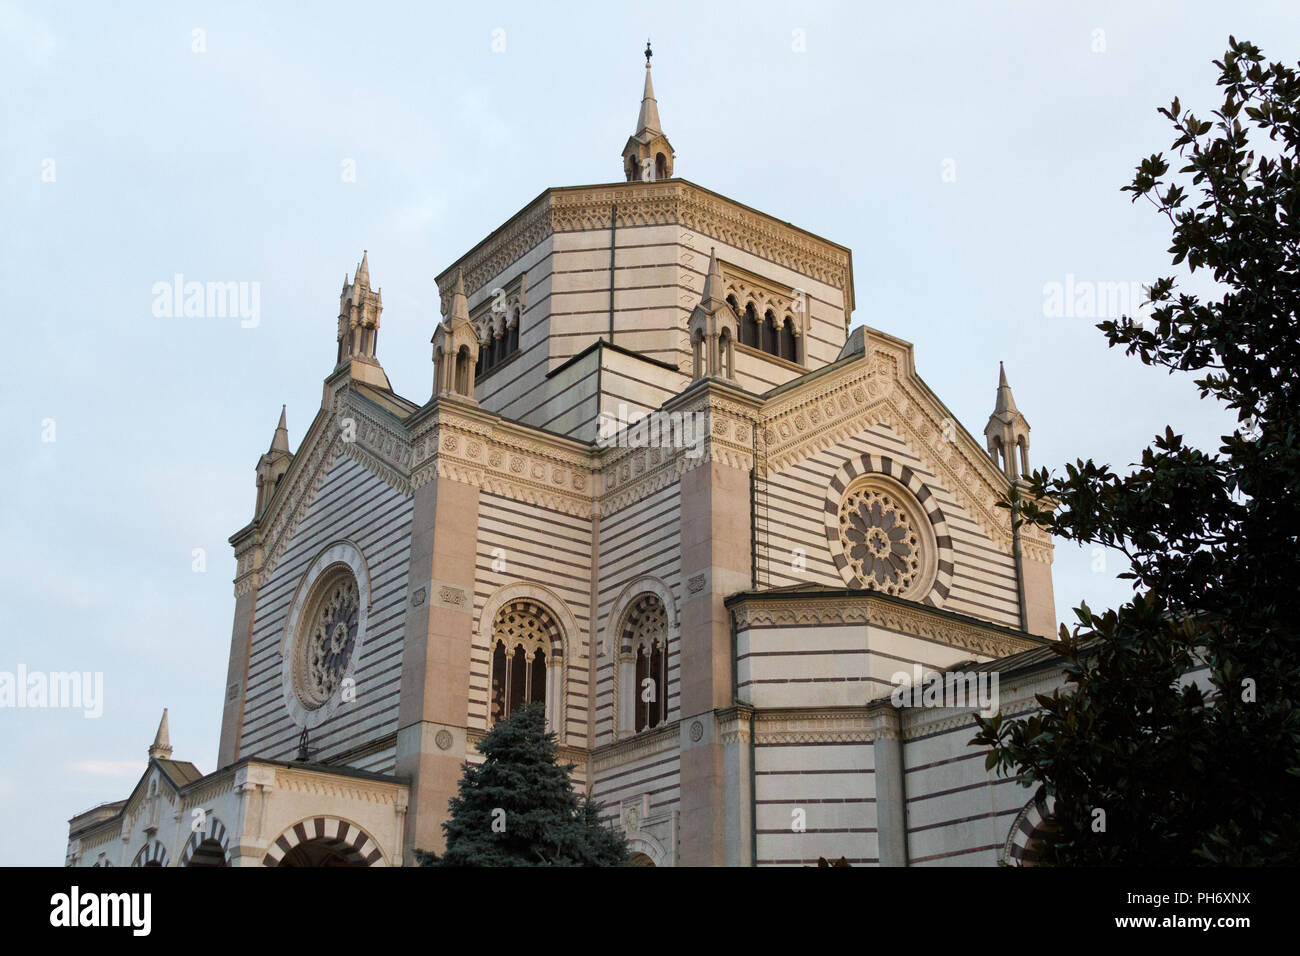 Milano, Italy. 2018/2/8. The Famedio [the hall of fame] - (the main memorial chapel of the cemetery) - at the Cimitero Monumentale ('Monumental Cemete Stock Photo